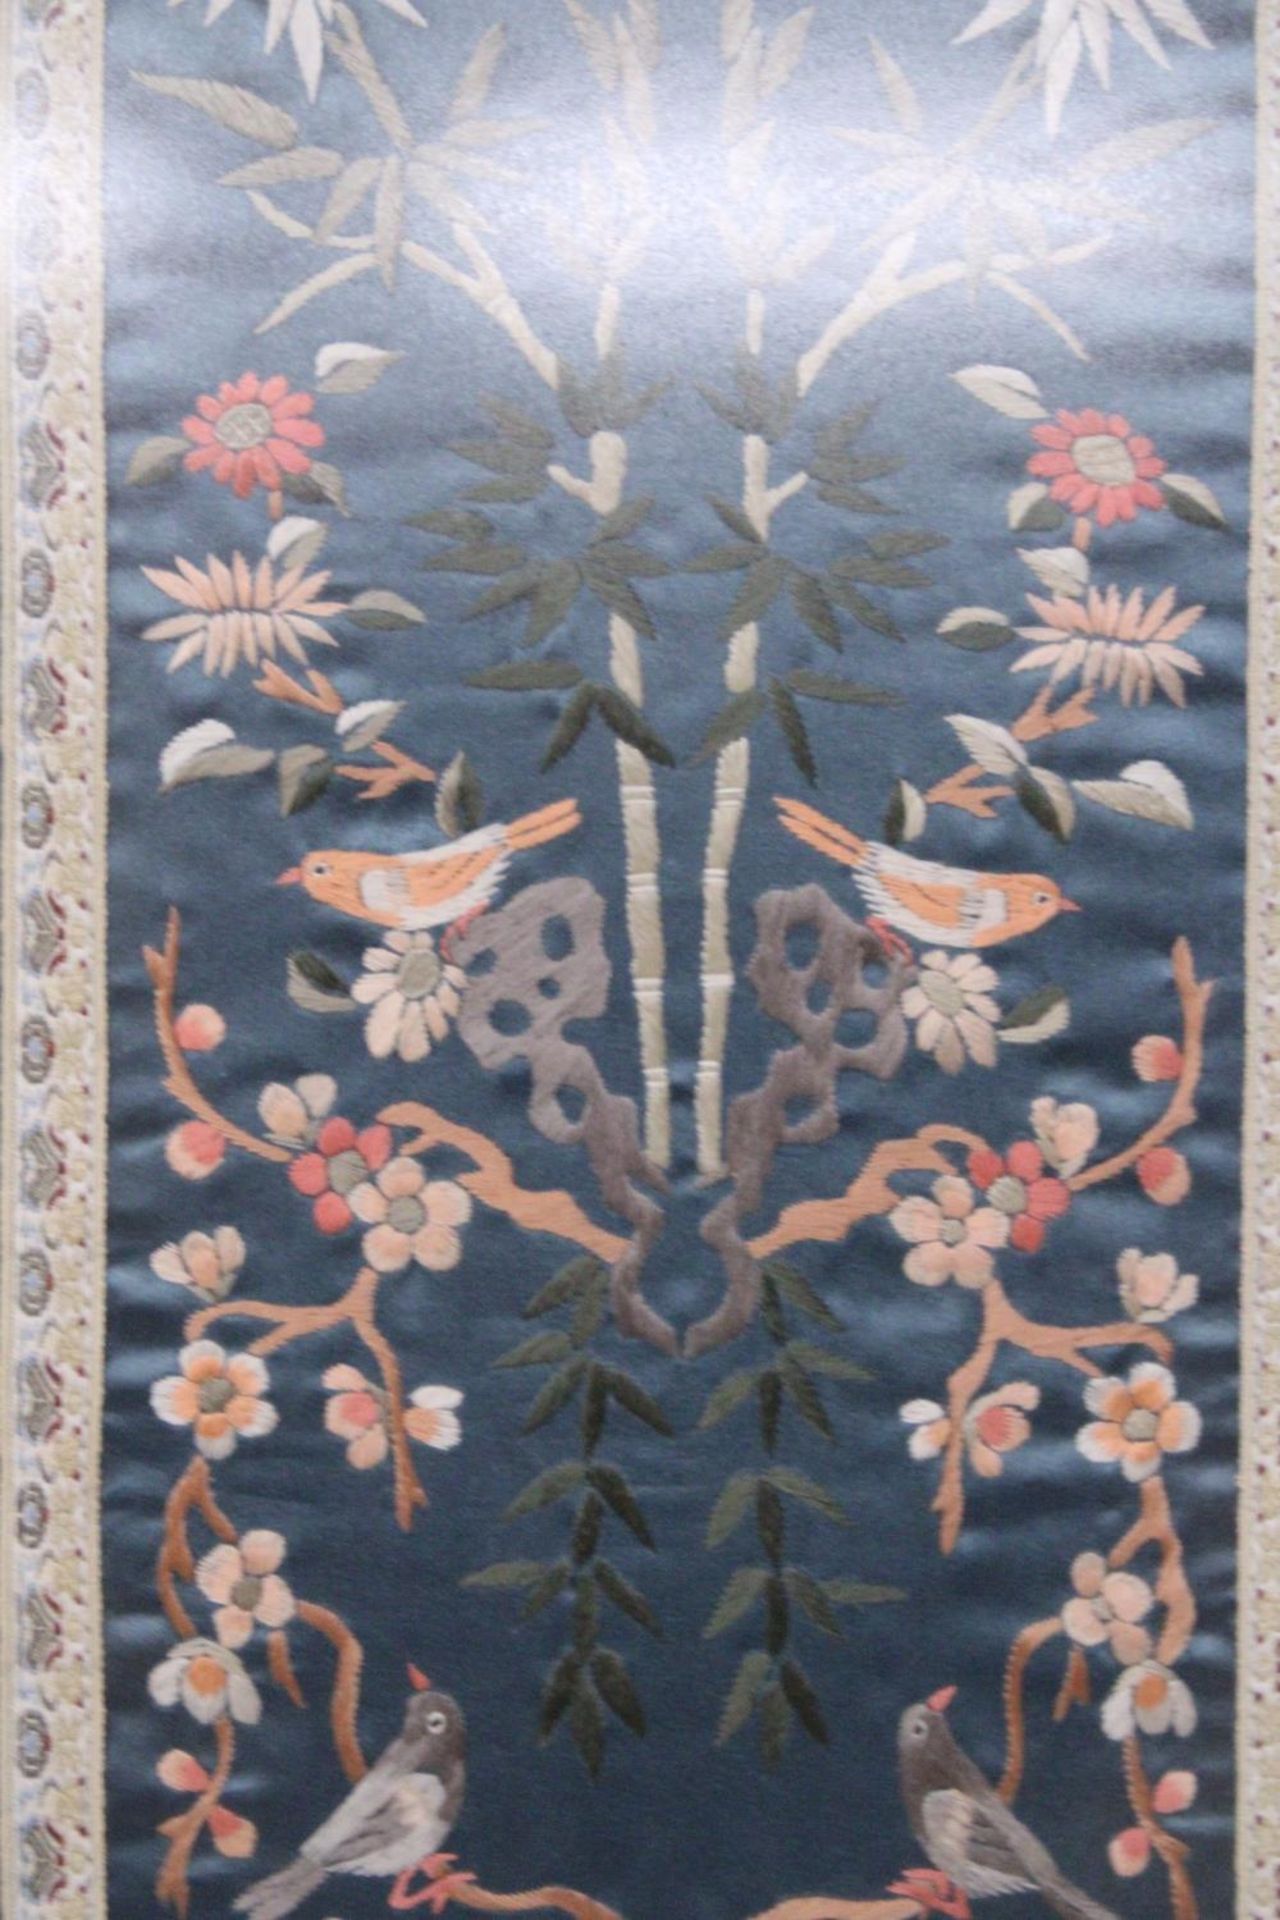 THREE CHINESE SILK EMBROIDERIES DEPICTING A LANDSCAPE SCENE, BIRDS AND FLORALS IN BAMBOO FRAMES - Image 5 of 7